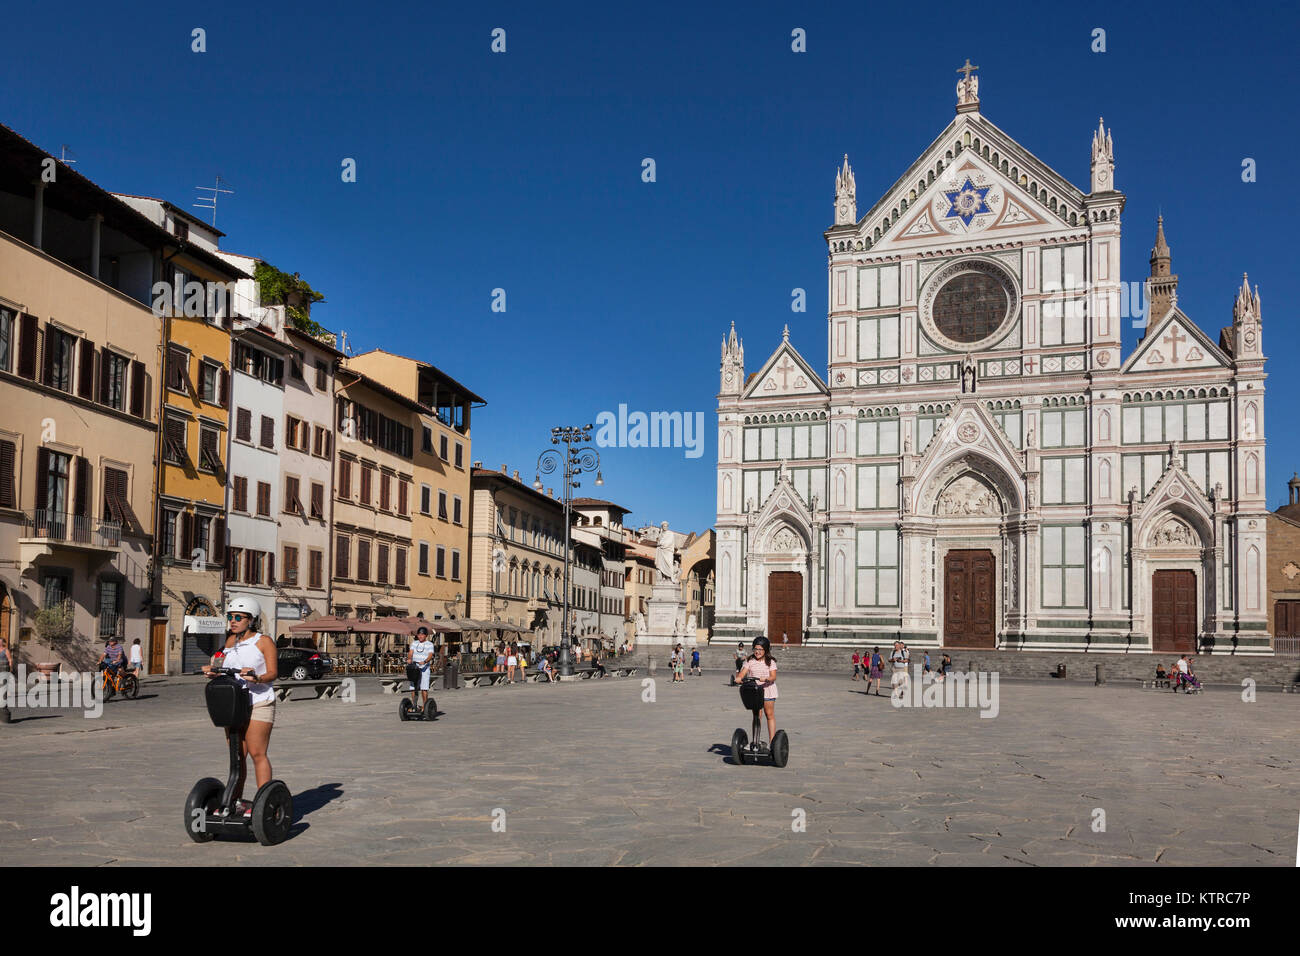 The Church of Santa Croce, Florence, Italy Stock Photo